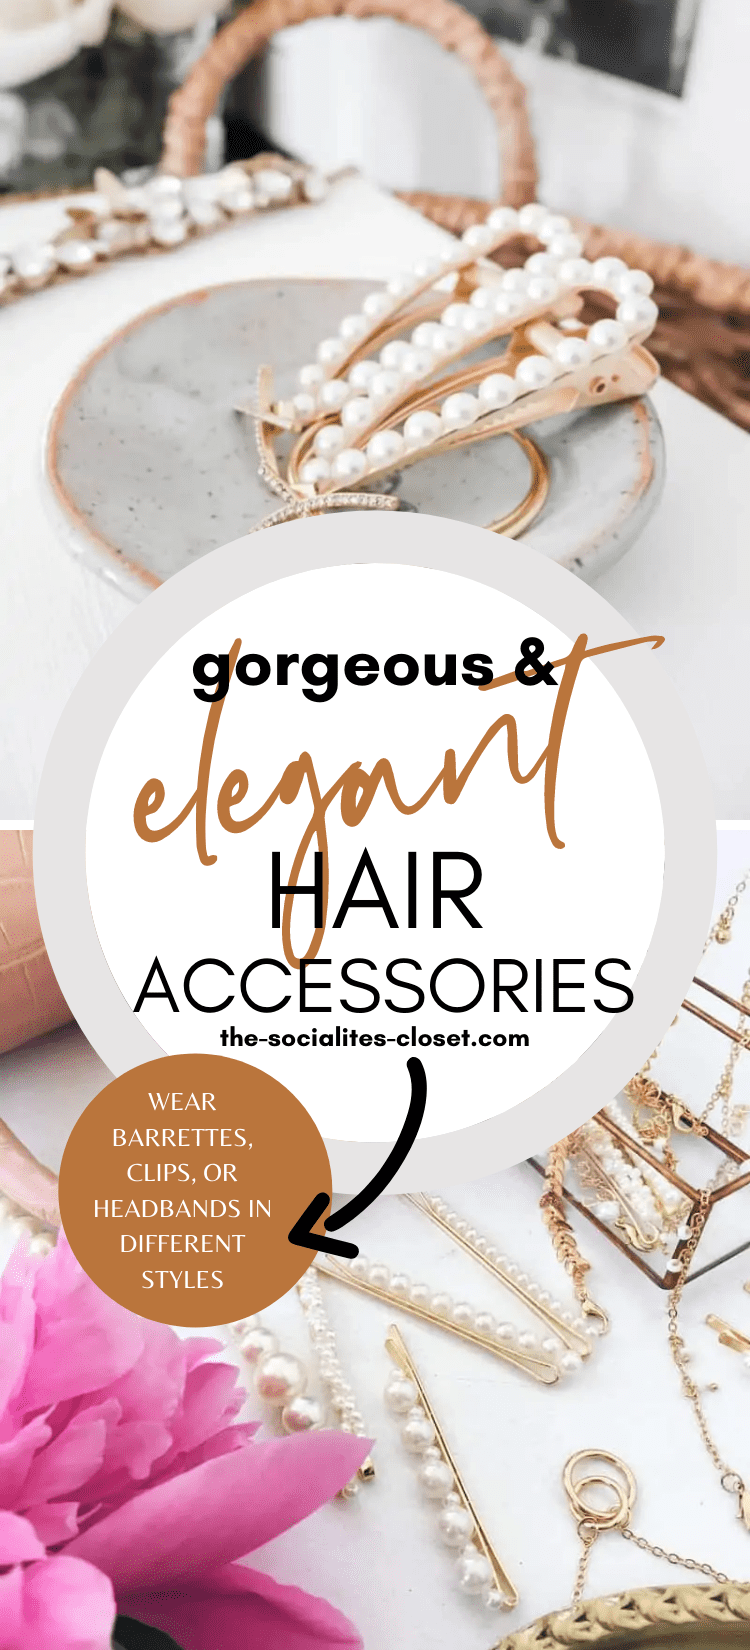 Who says you can't have an elegant and stylish look? These elegant hair accessories will help to enhance your natural beauty with special day flair. Wear barrettes, clips, or headbands in different styles for extra style points!